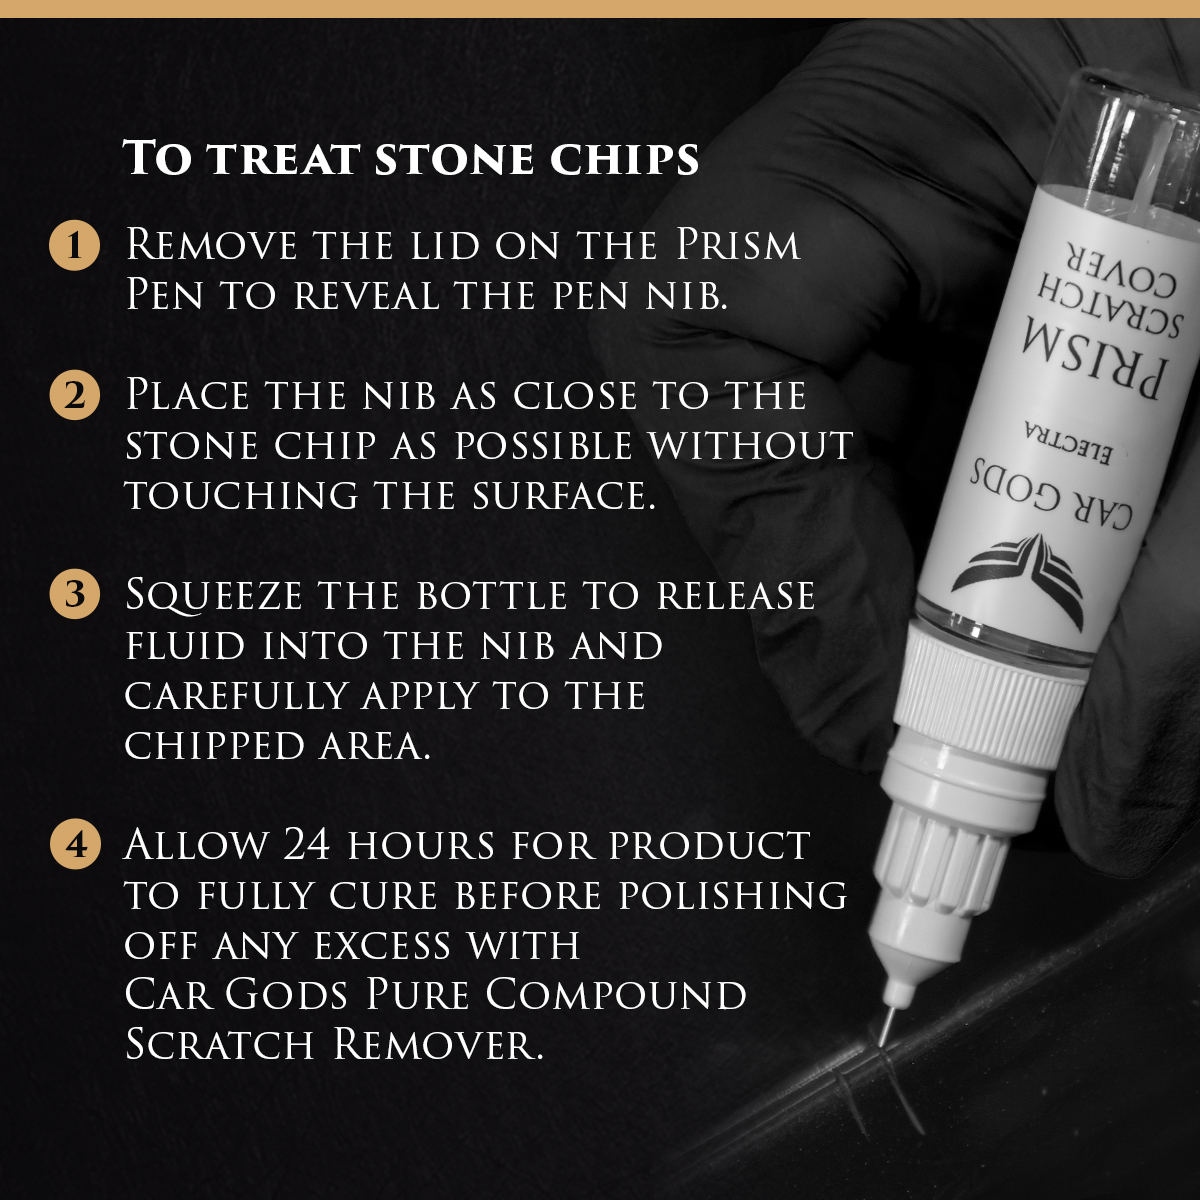 Image shows Prism Scratch Cover pen nib being used to treat a stone chip.